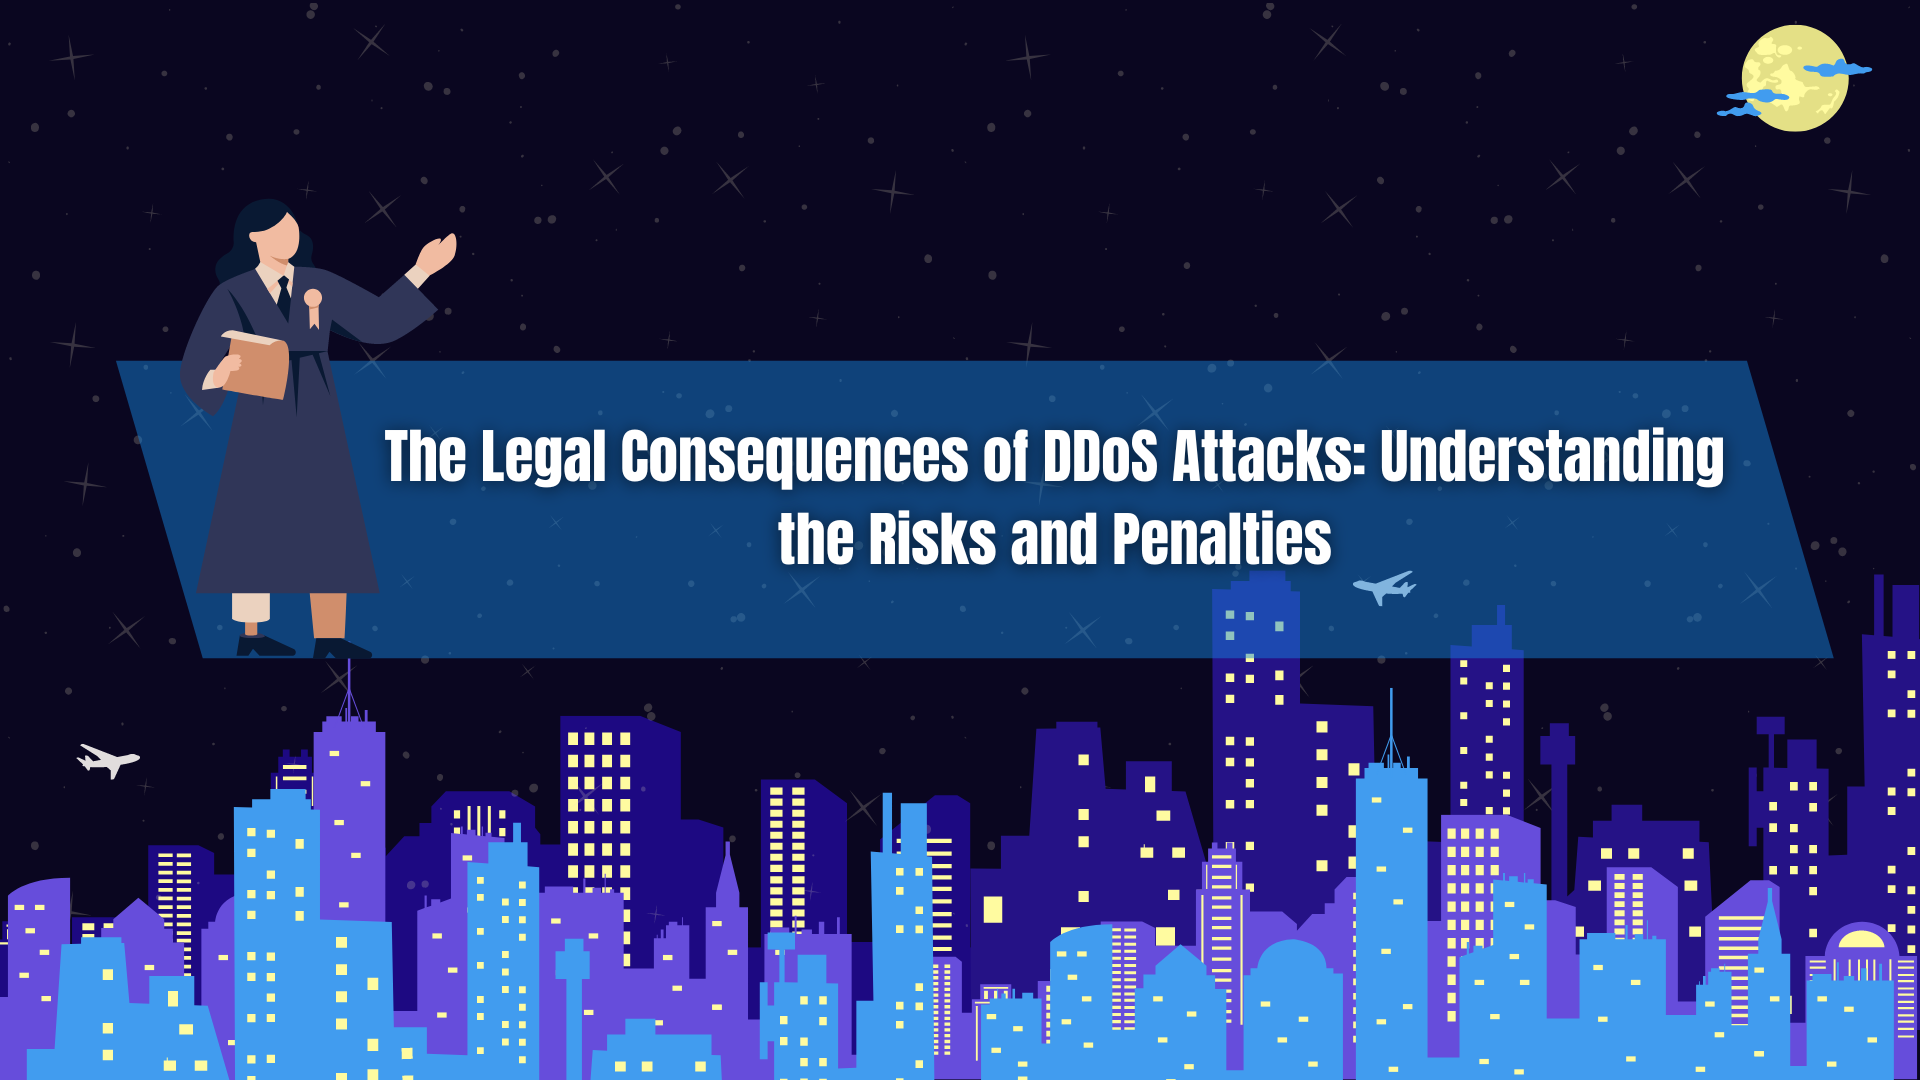 The Legal Consequences of DDoS Attacks Understanding the Risks and Penalties